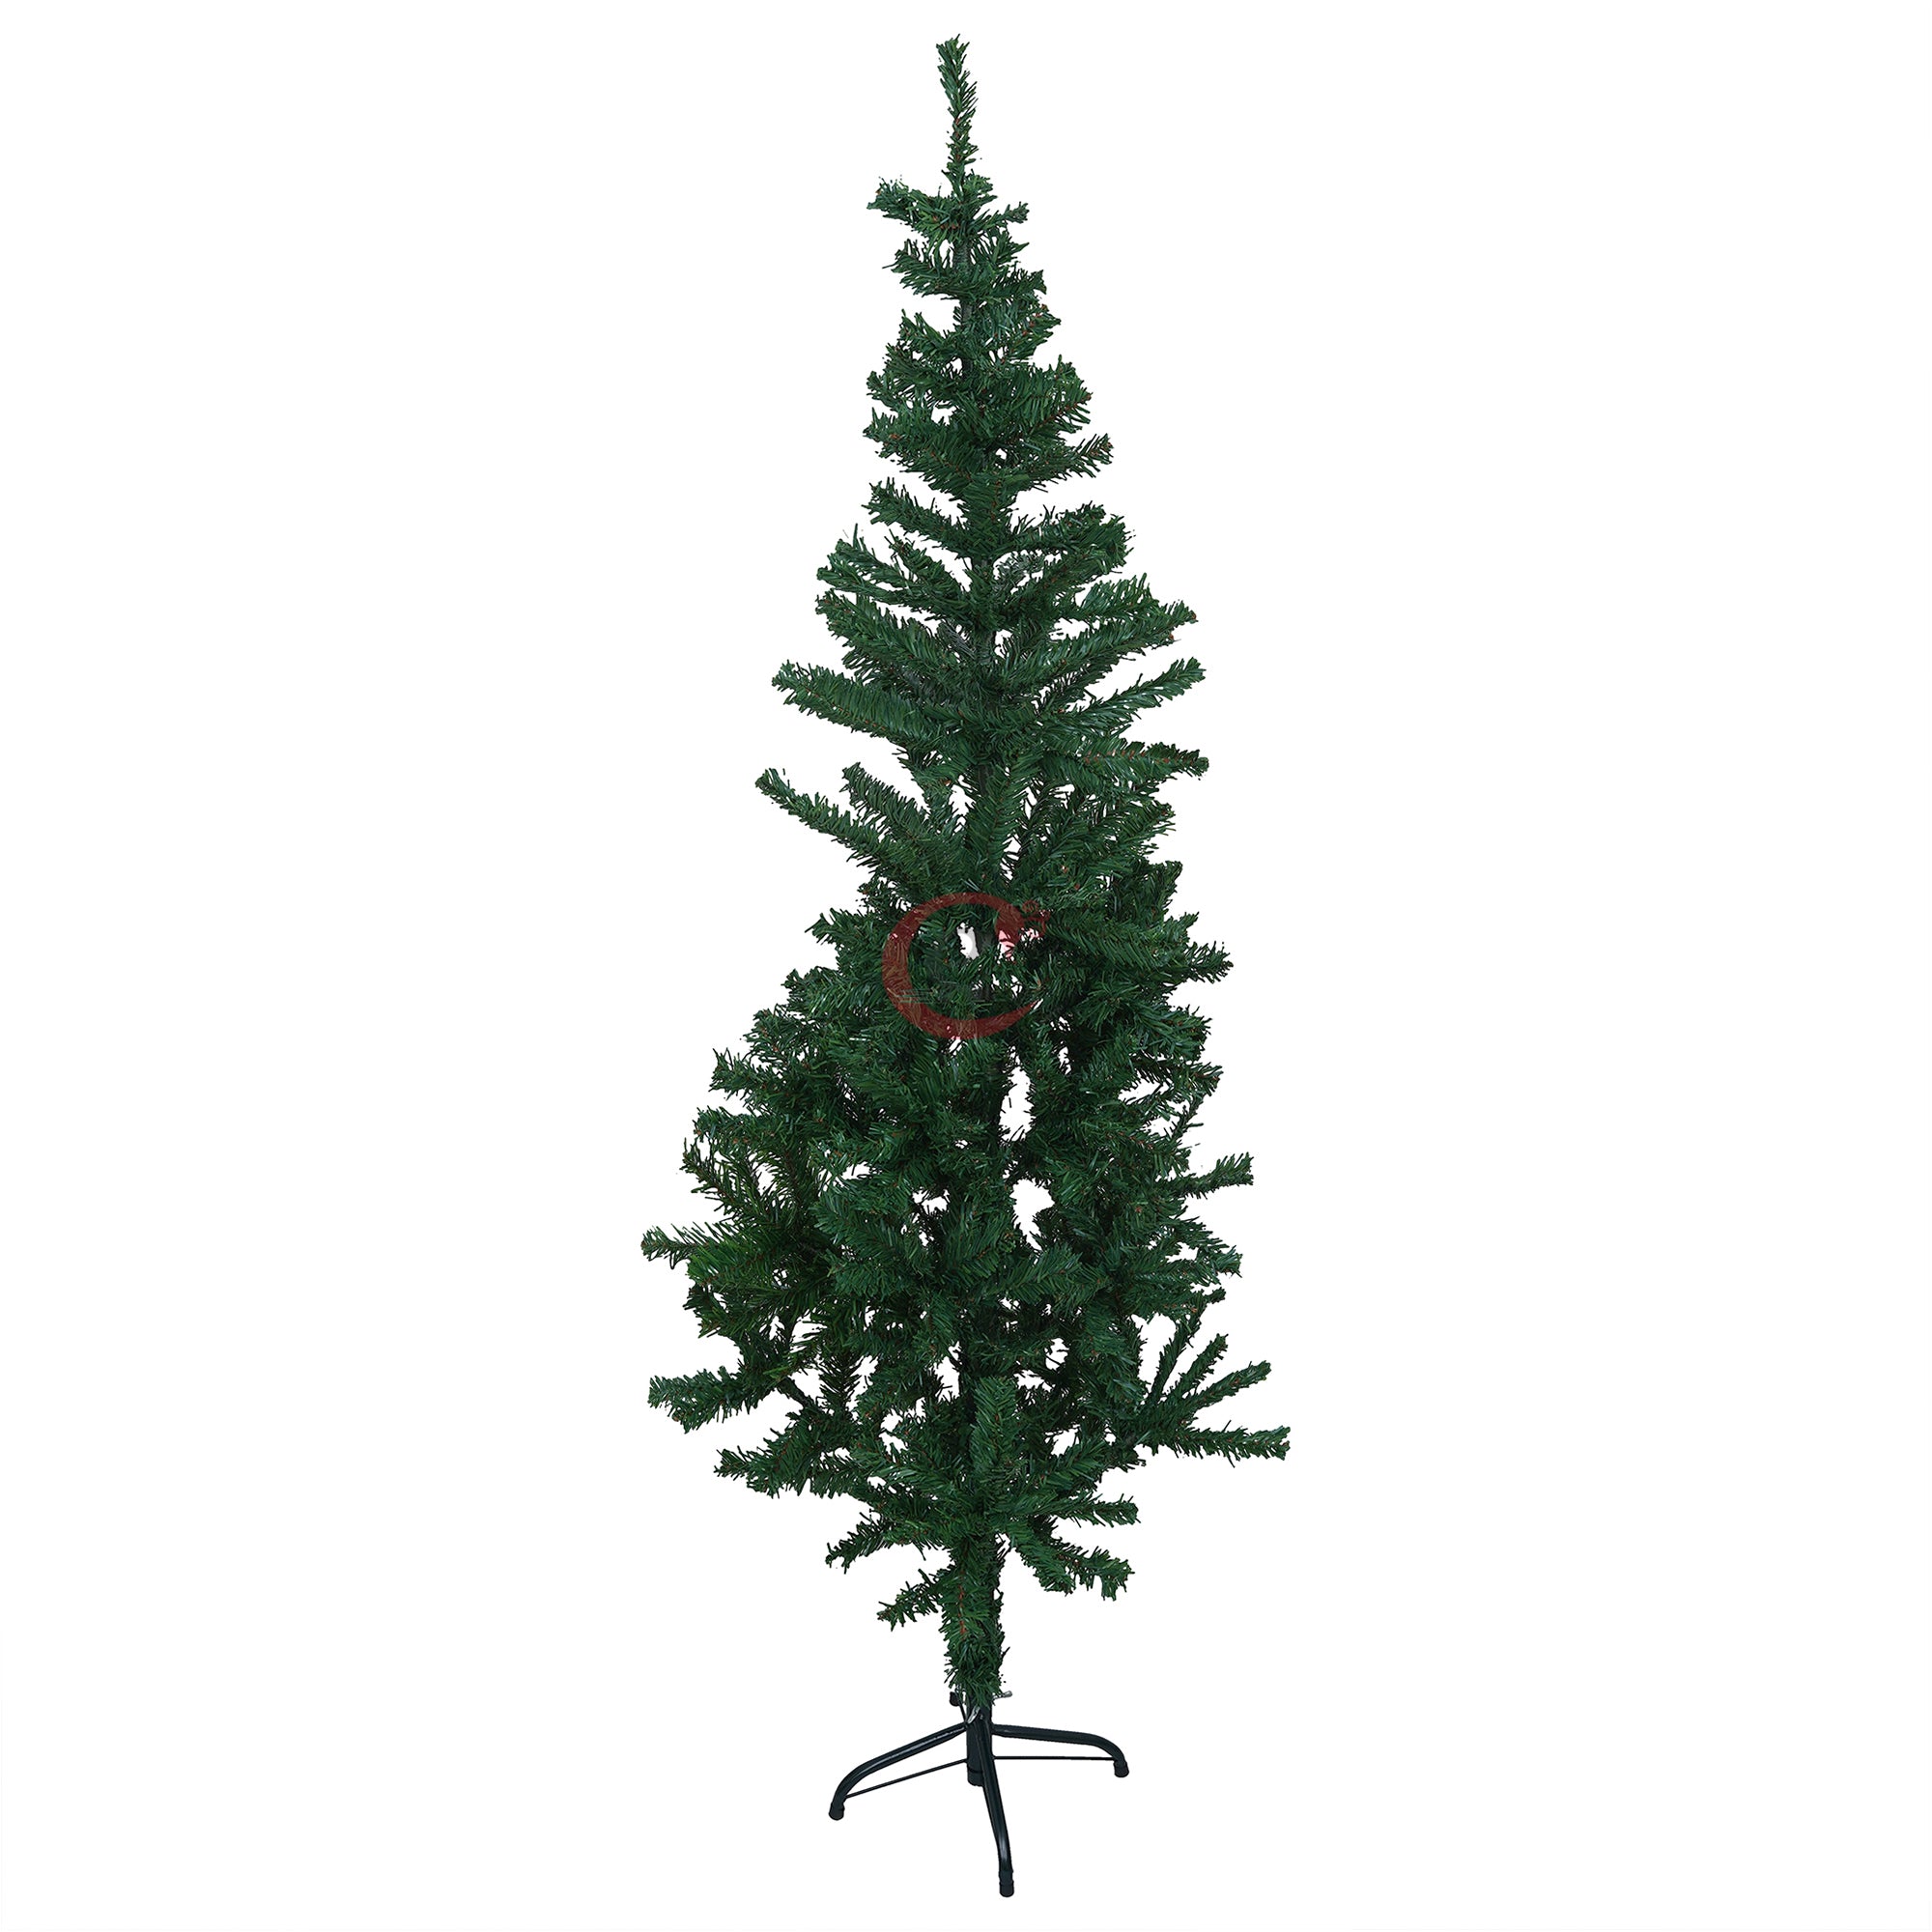 eCraftIndia 5 Feet Green Artificial Christmas Tree Xmas Pine Tree with Metal Stand - Xmas Tree for Indoor, Outdoor, Home, Living Room, Office, Church Decor - Merry Christmas Decoration Item 6